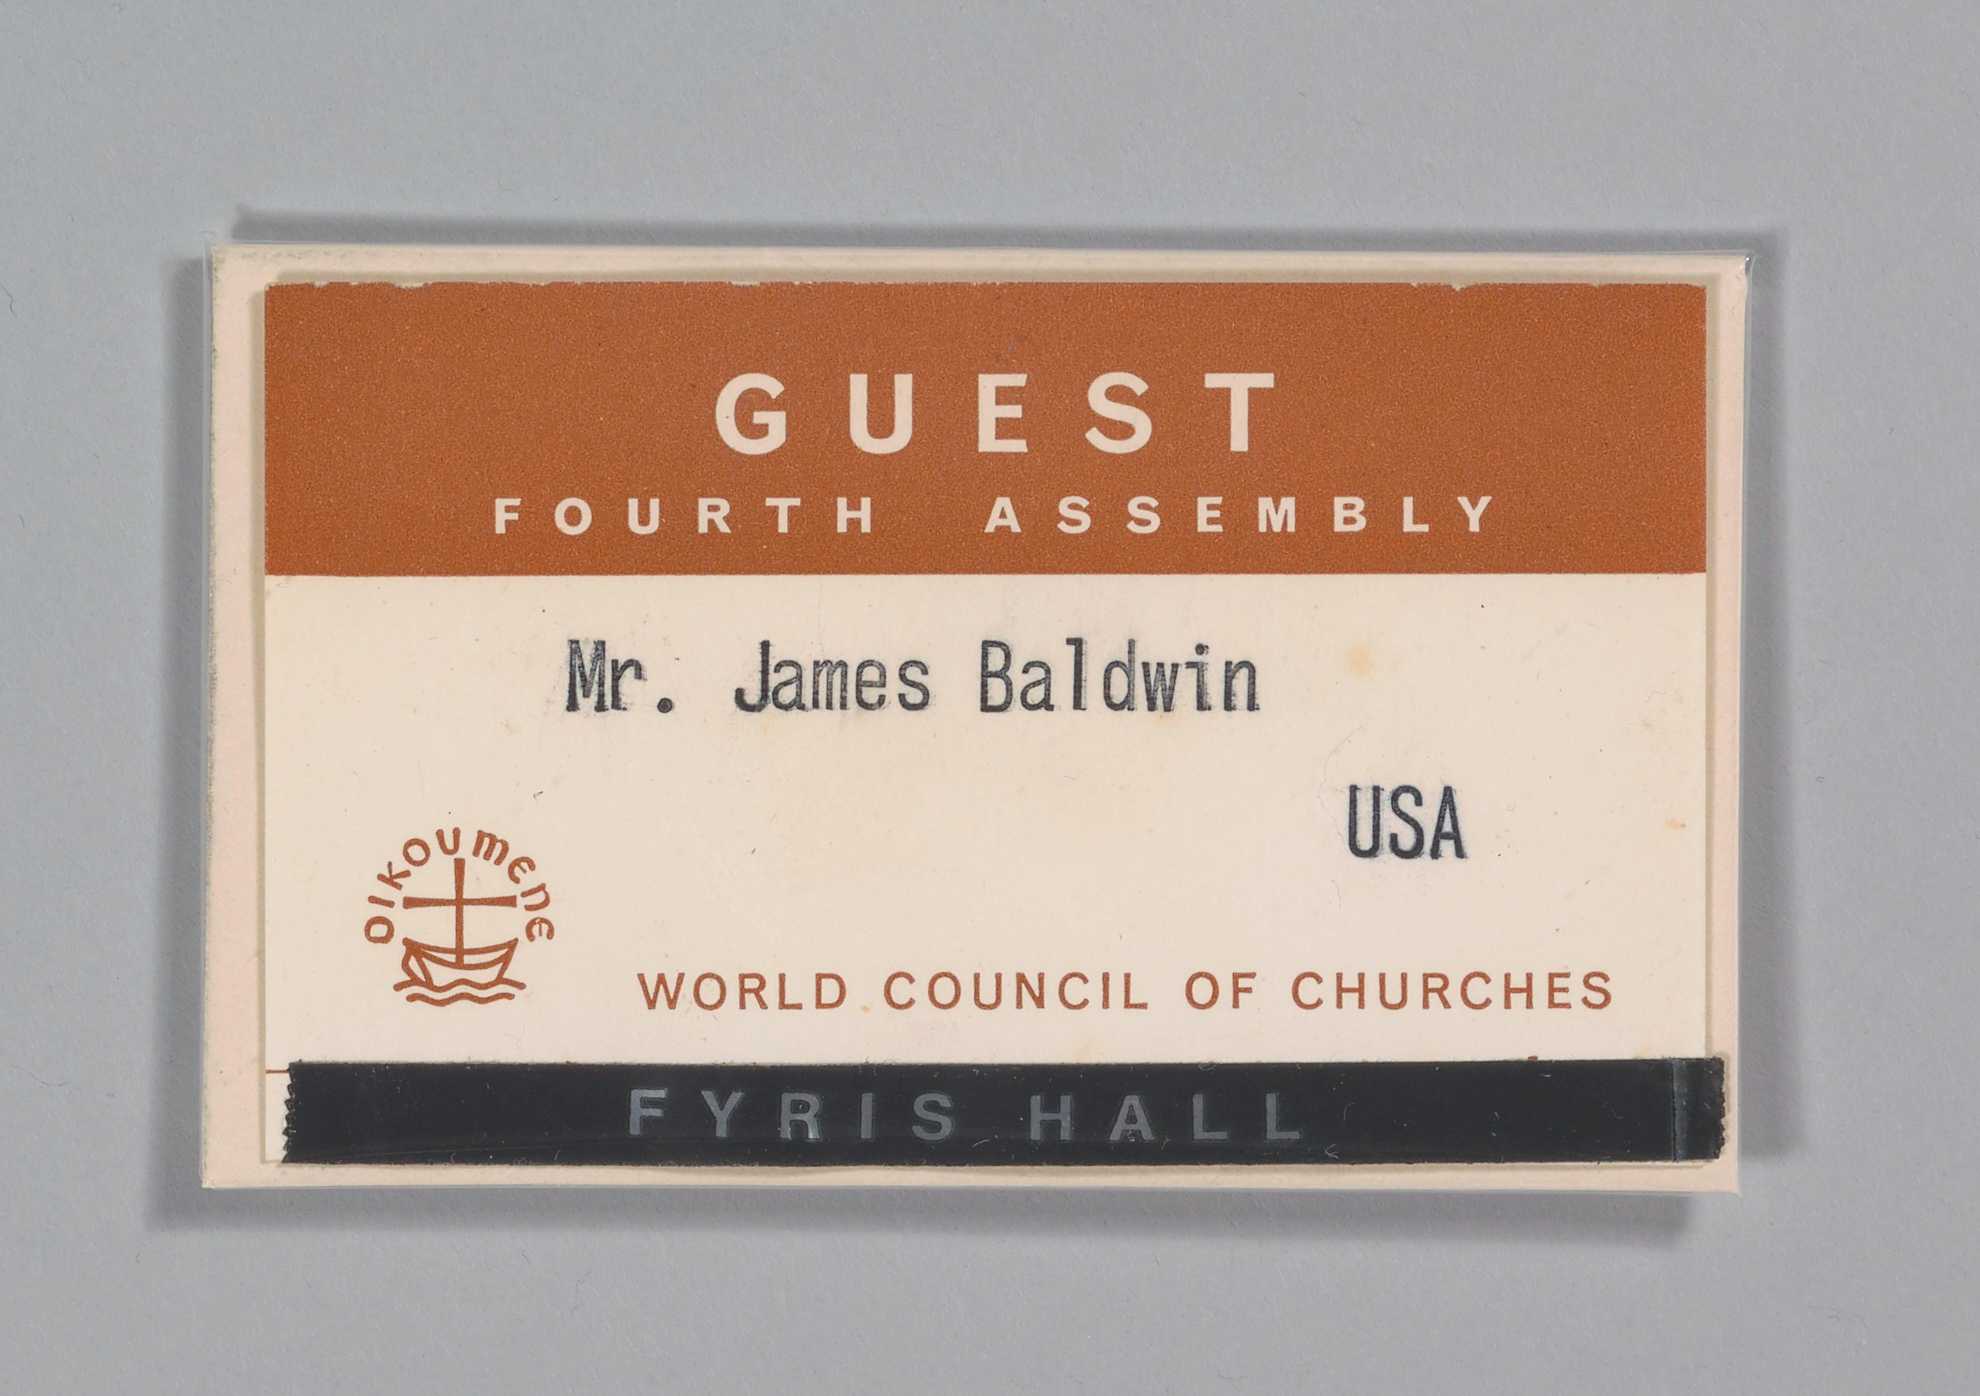 Image of Guest badge for the 1968 World Council of Churches Fourth Assembly. James Baldwin's name is typed on the badge.